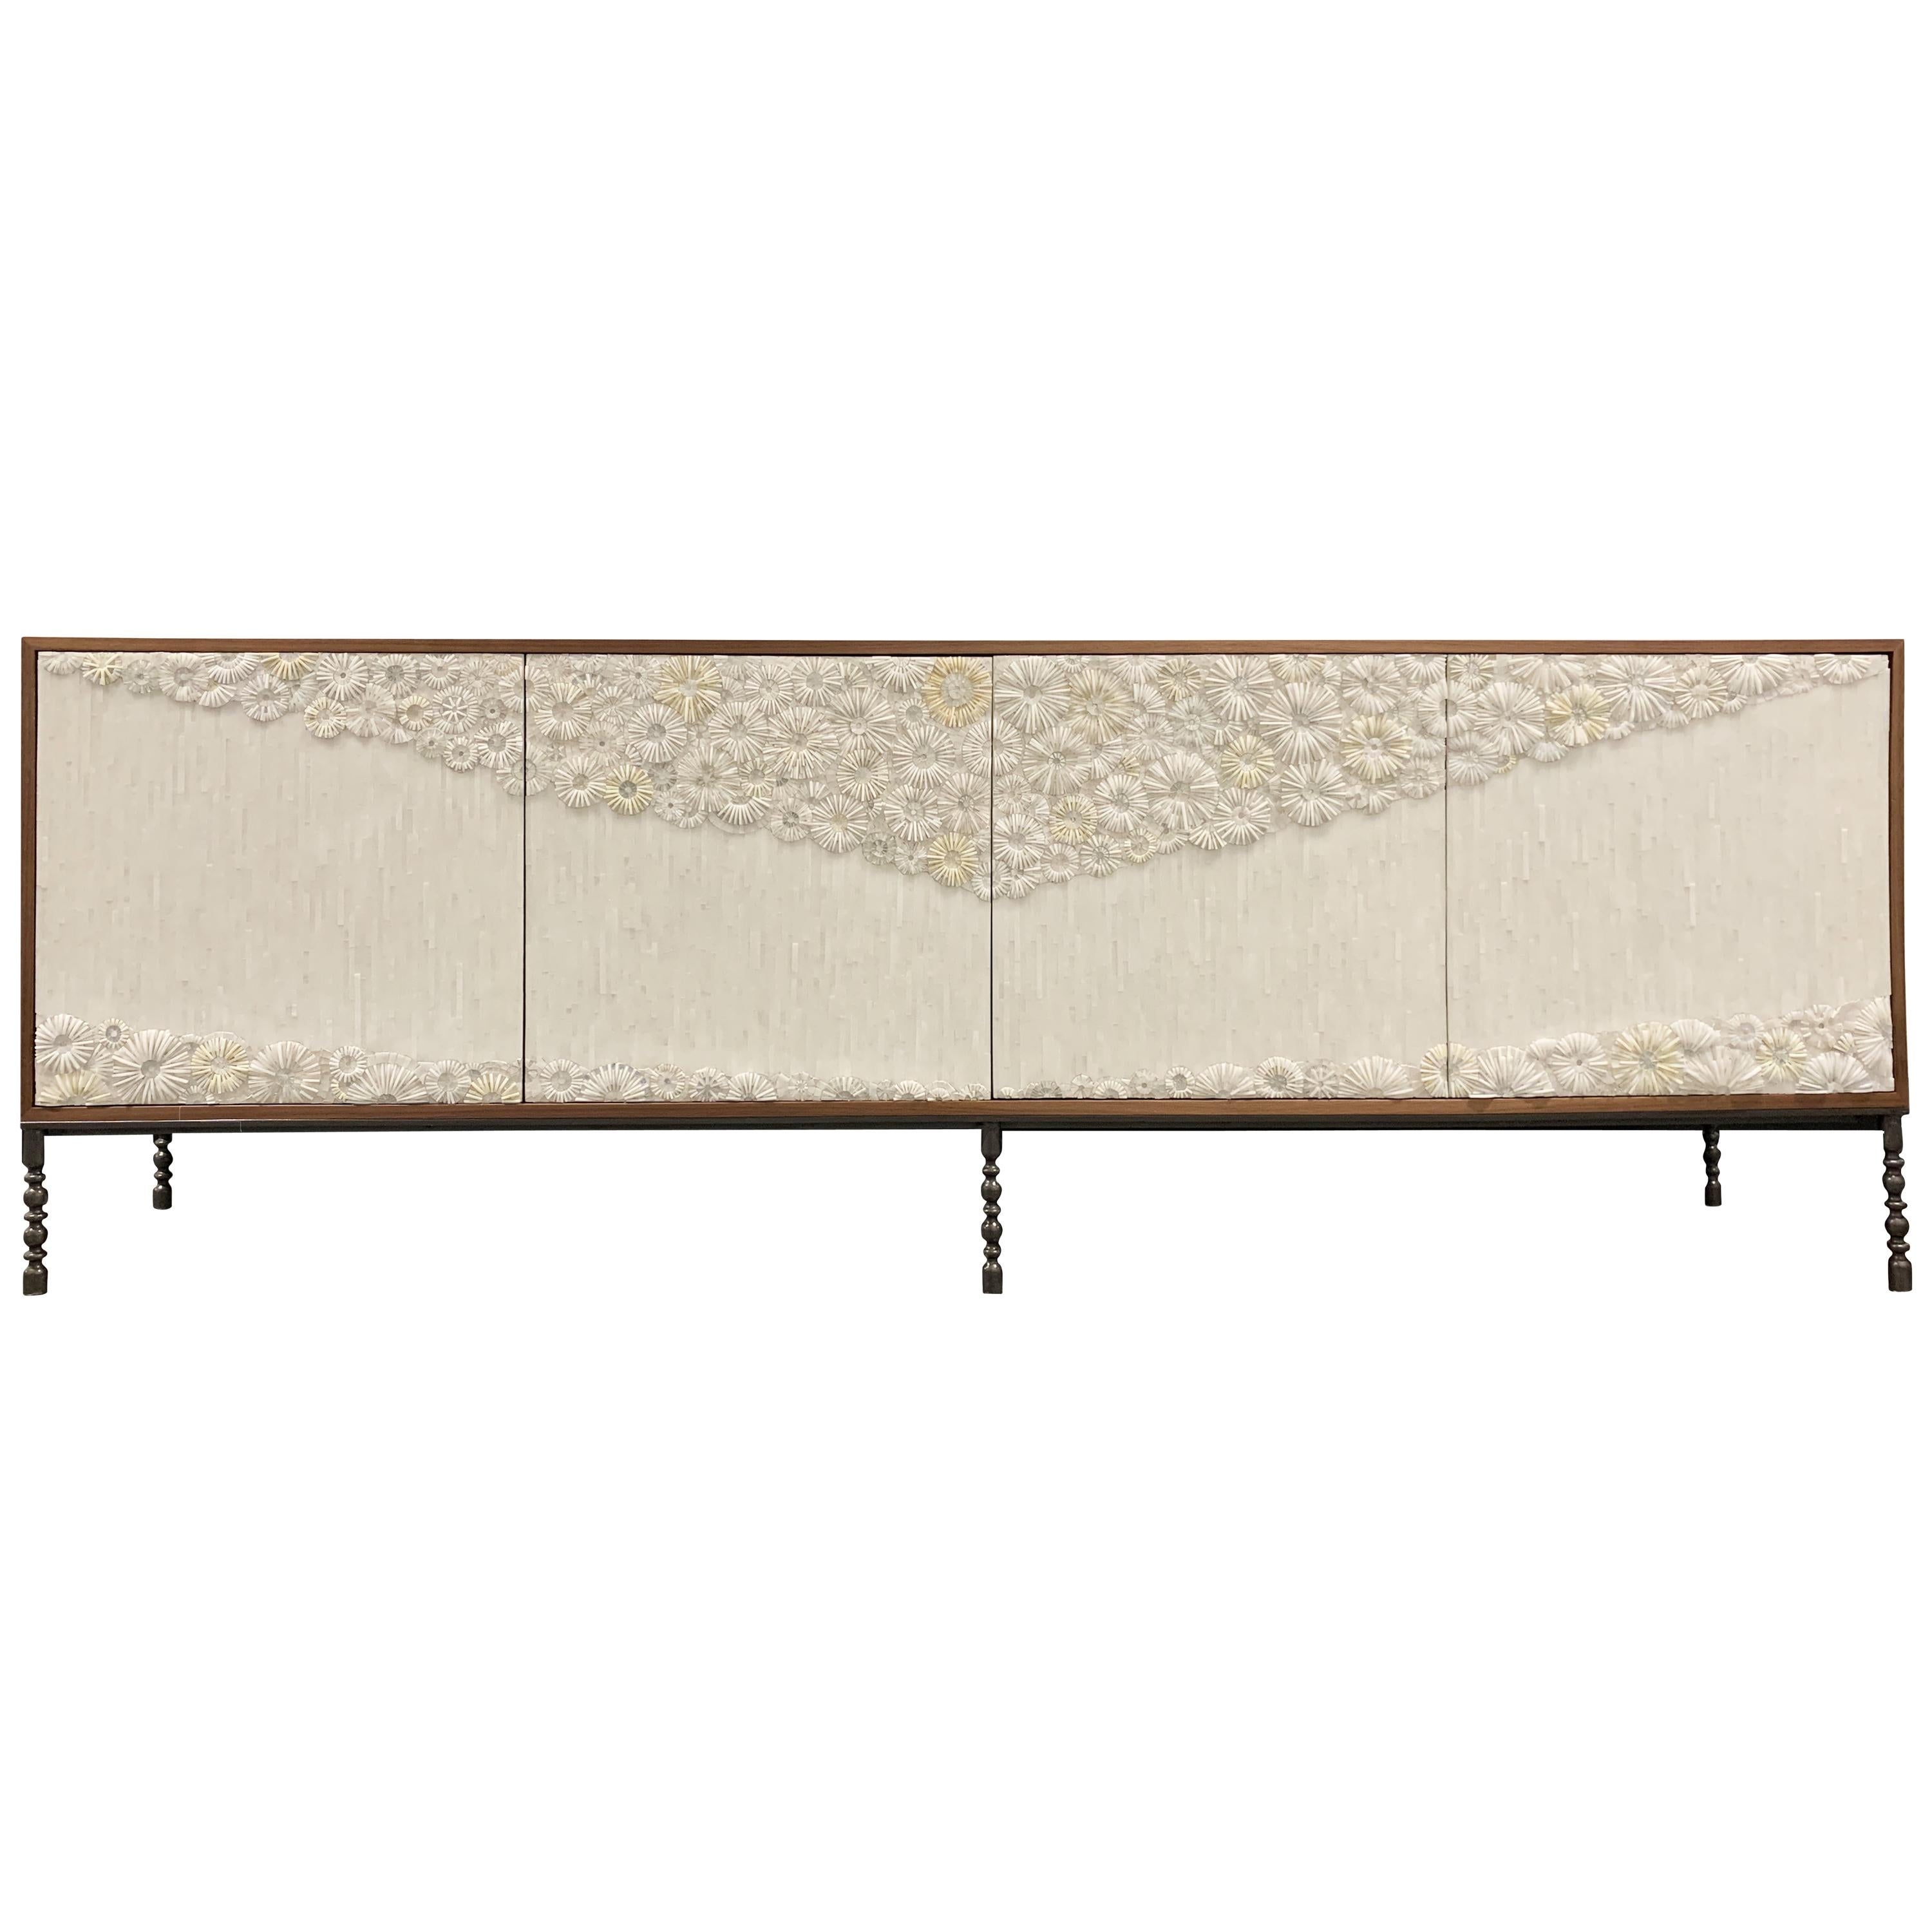 Modern 4-Door Walnut Buffet with Blossom Glass Mosaic by Ercole Home For Sale